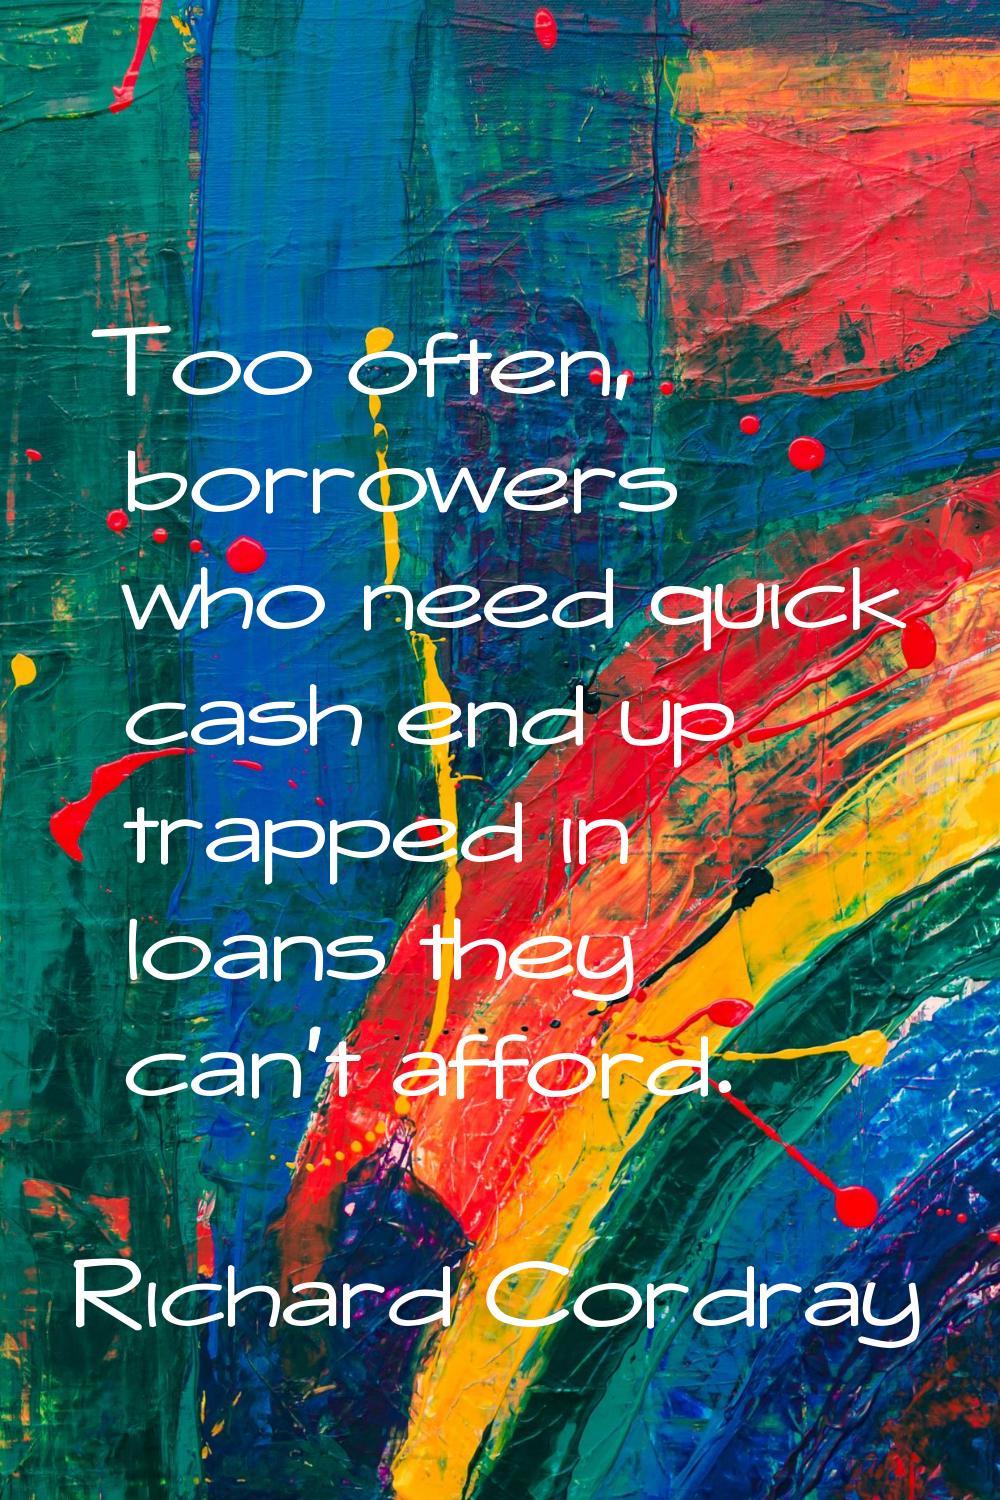 Too often, borrowers who need quick cash end up trapped in loans they can't afford.